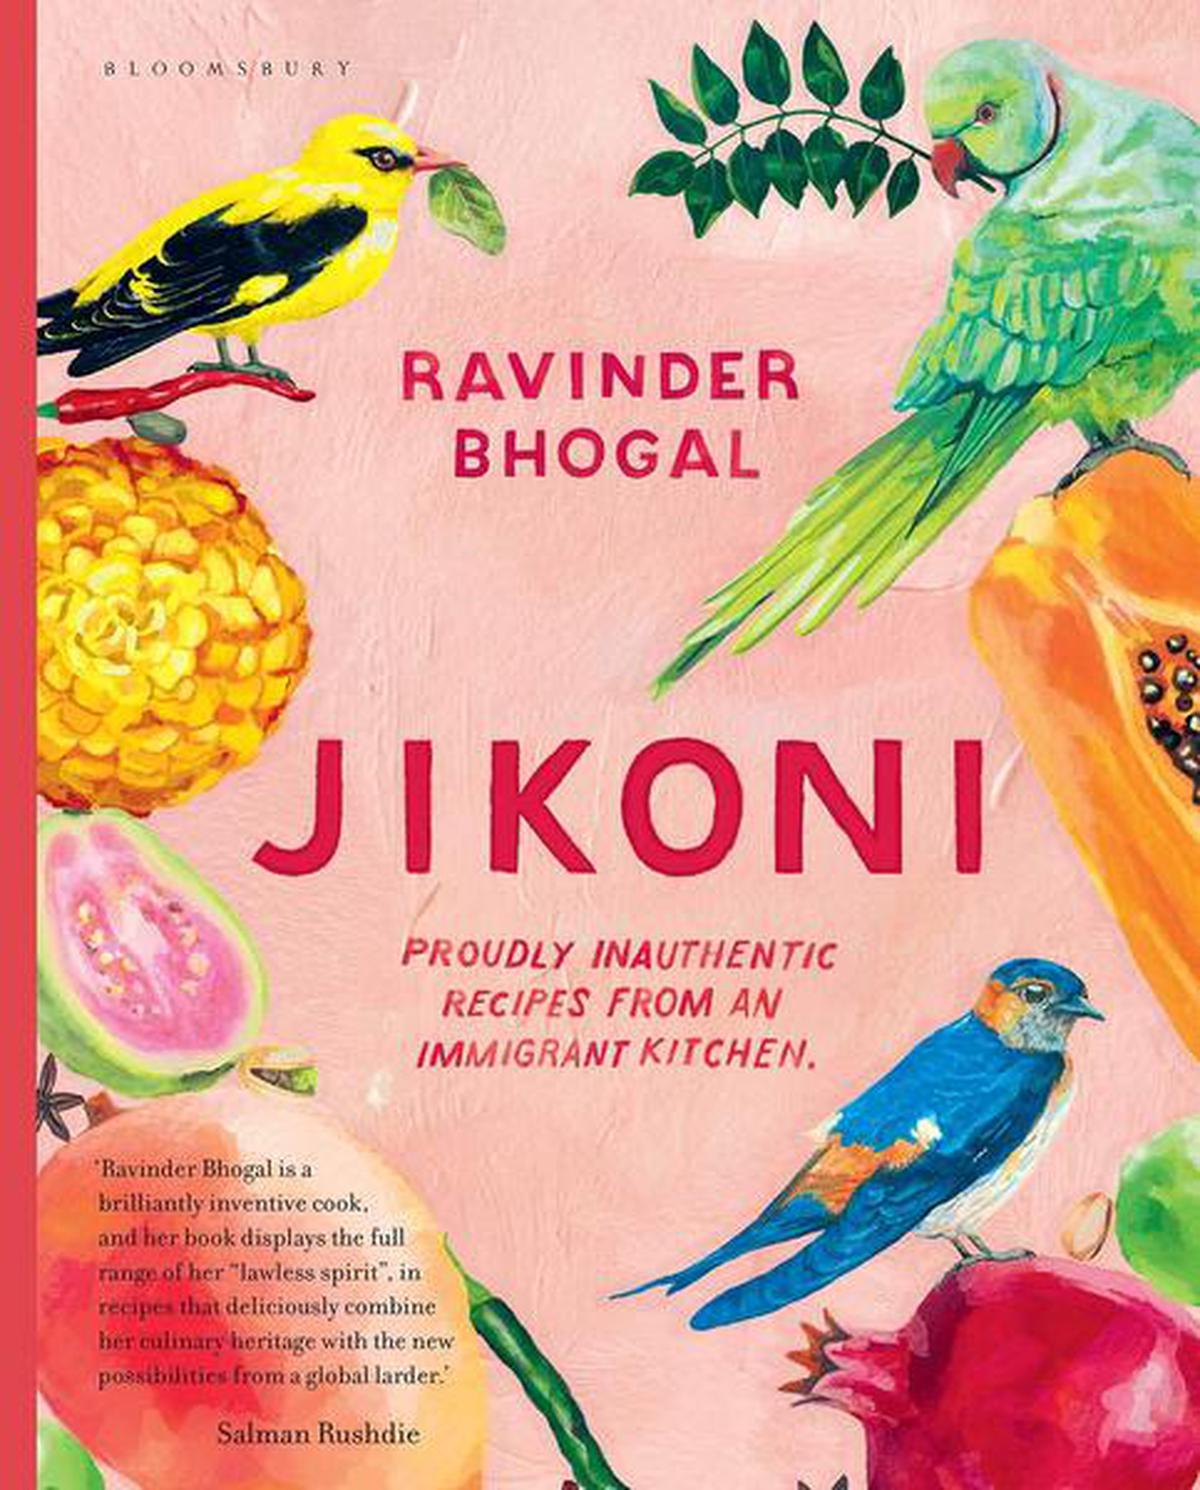 Jikoni: Proudly Inauthentic Recipes from an Immigrant Kitchen, Ravinder Bhogal, Bloomsbury.